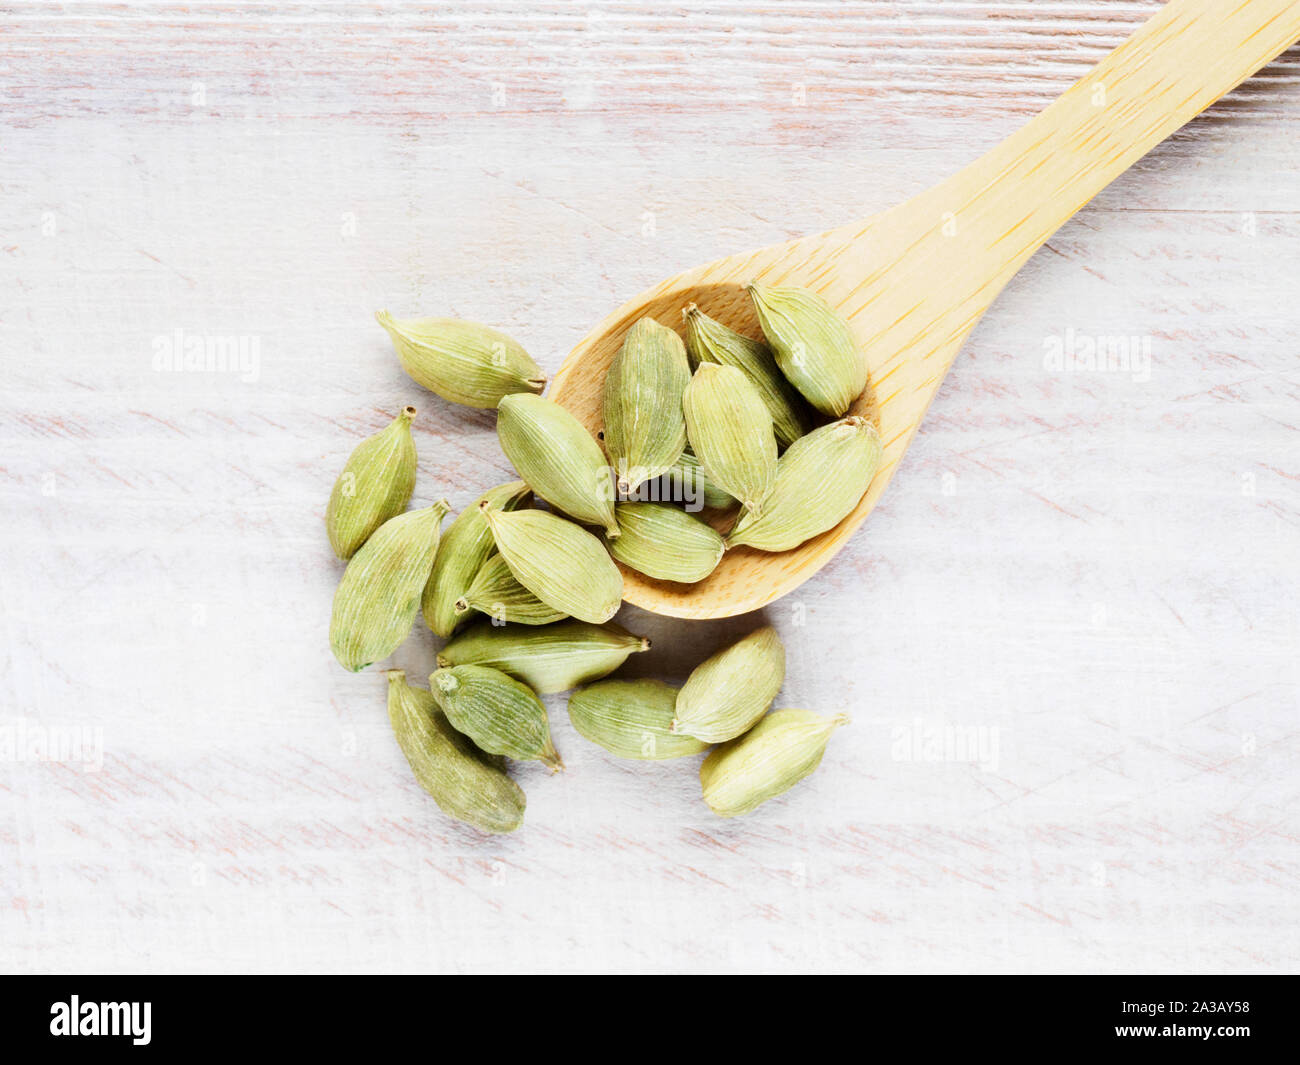 Spice Green cardamom (Elettaria cardamomum) in a spoon diagonally on a brown wooden background Stock Photo